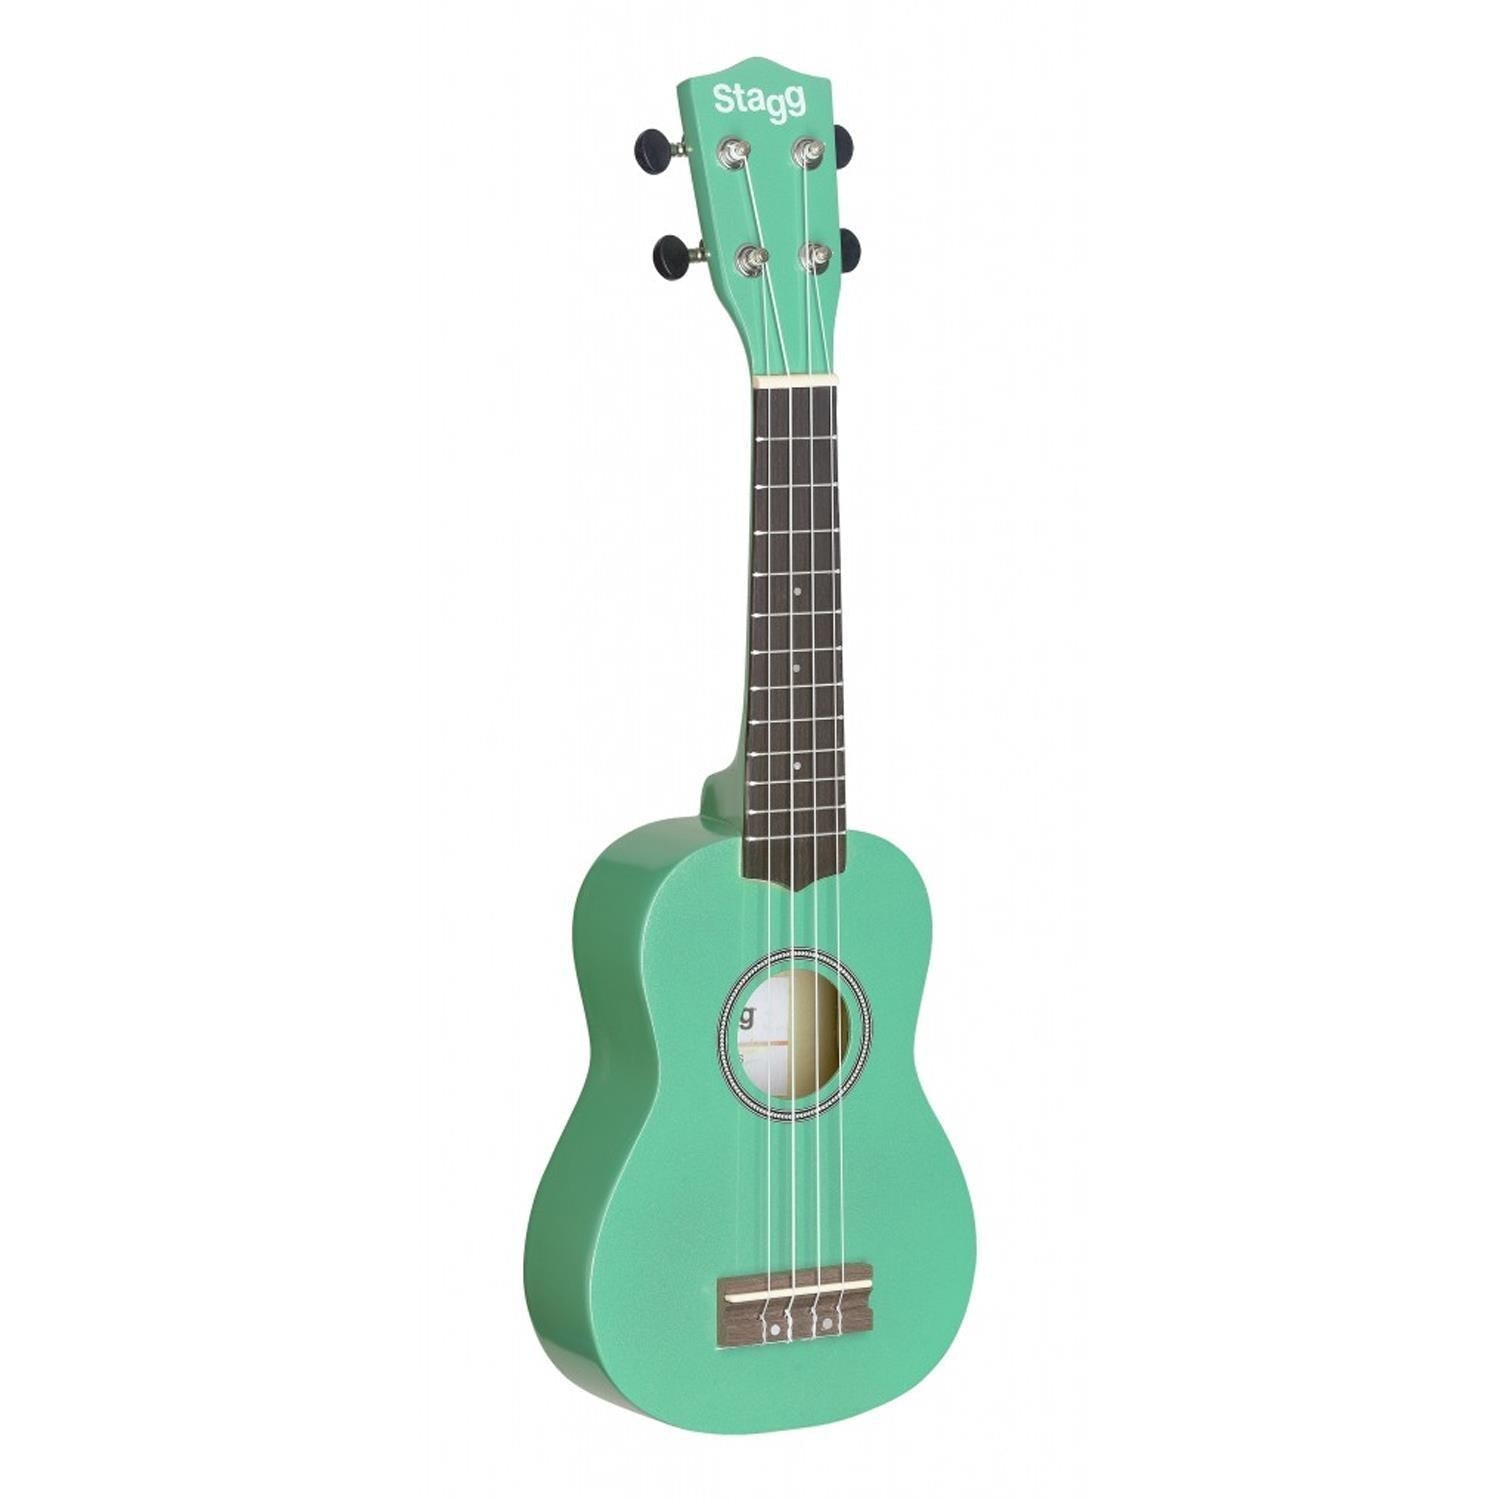 Stagg US-GRASS Green Soprano Ukulele With Bag - DY Pro Audio